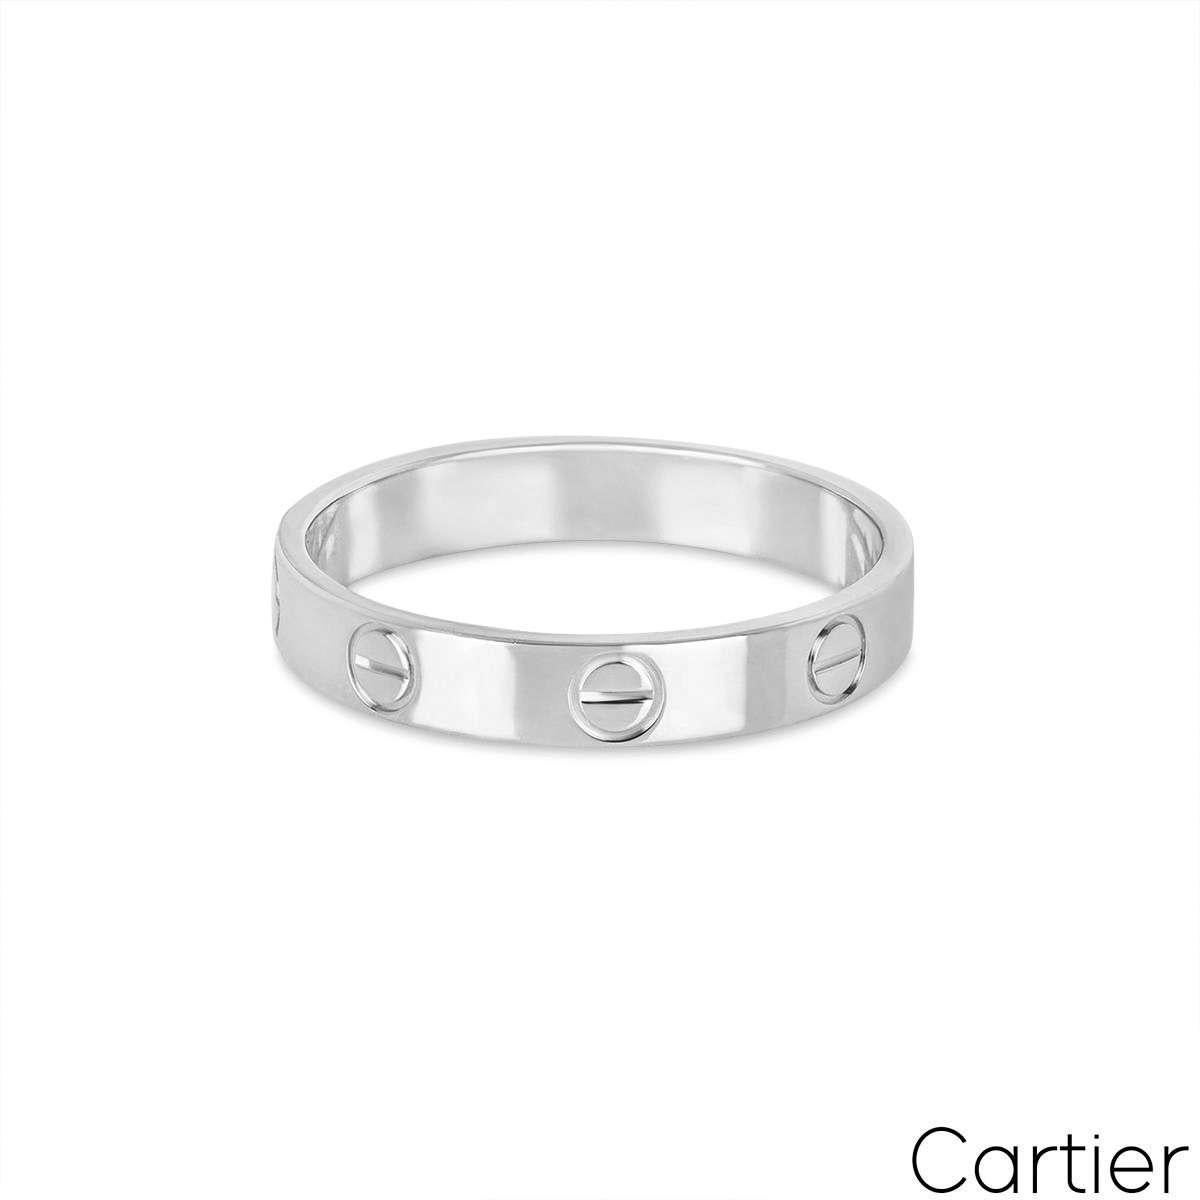 Cartier White Gold Plain Love Wedding Band Size 59 B4085100 In Excellent Condition For Sale In London, GB